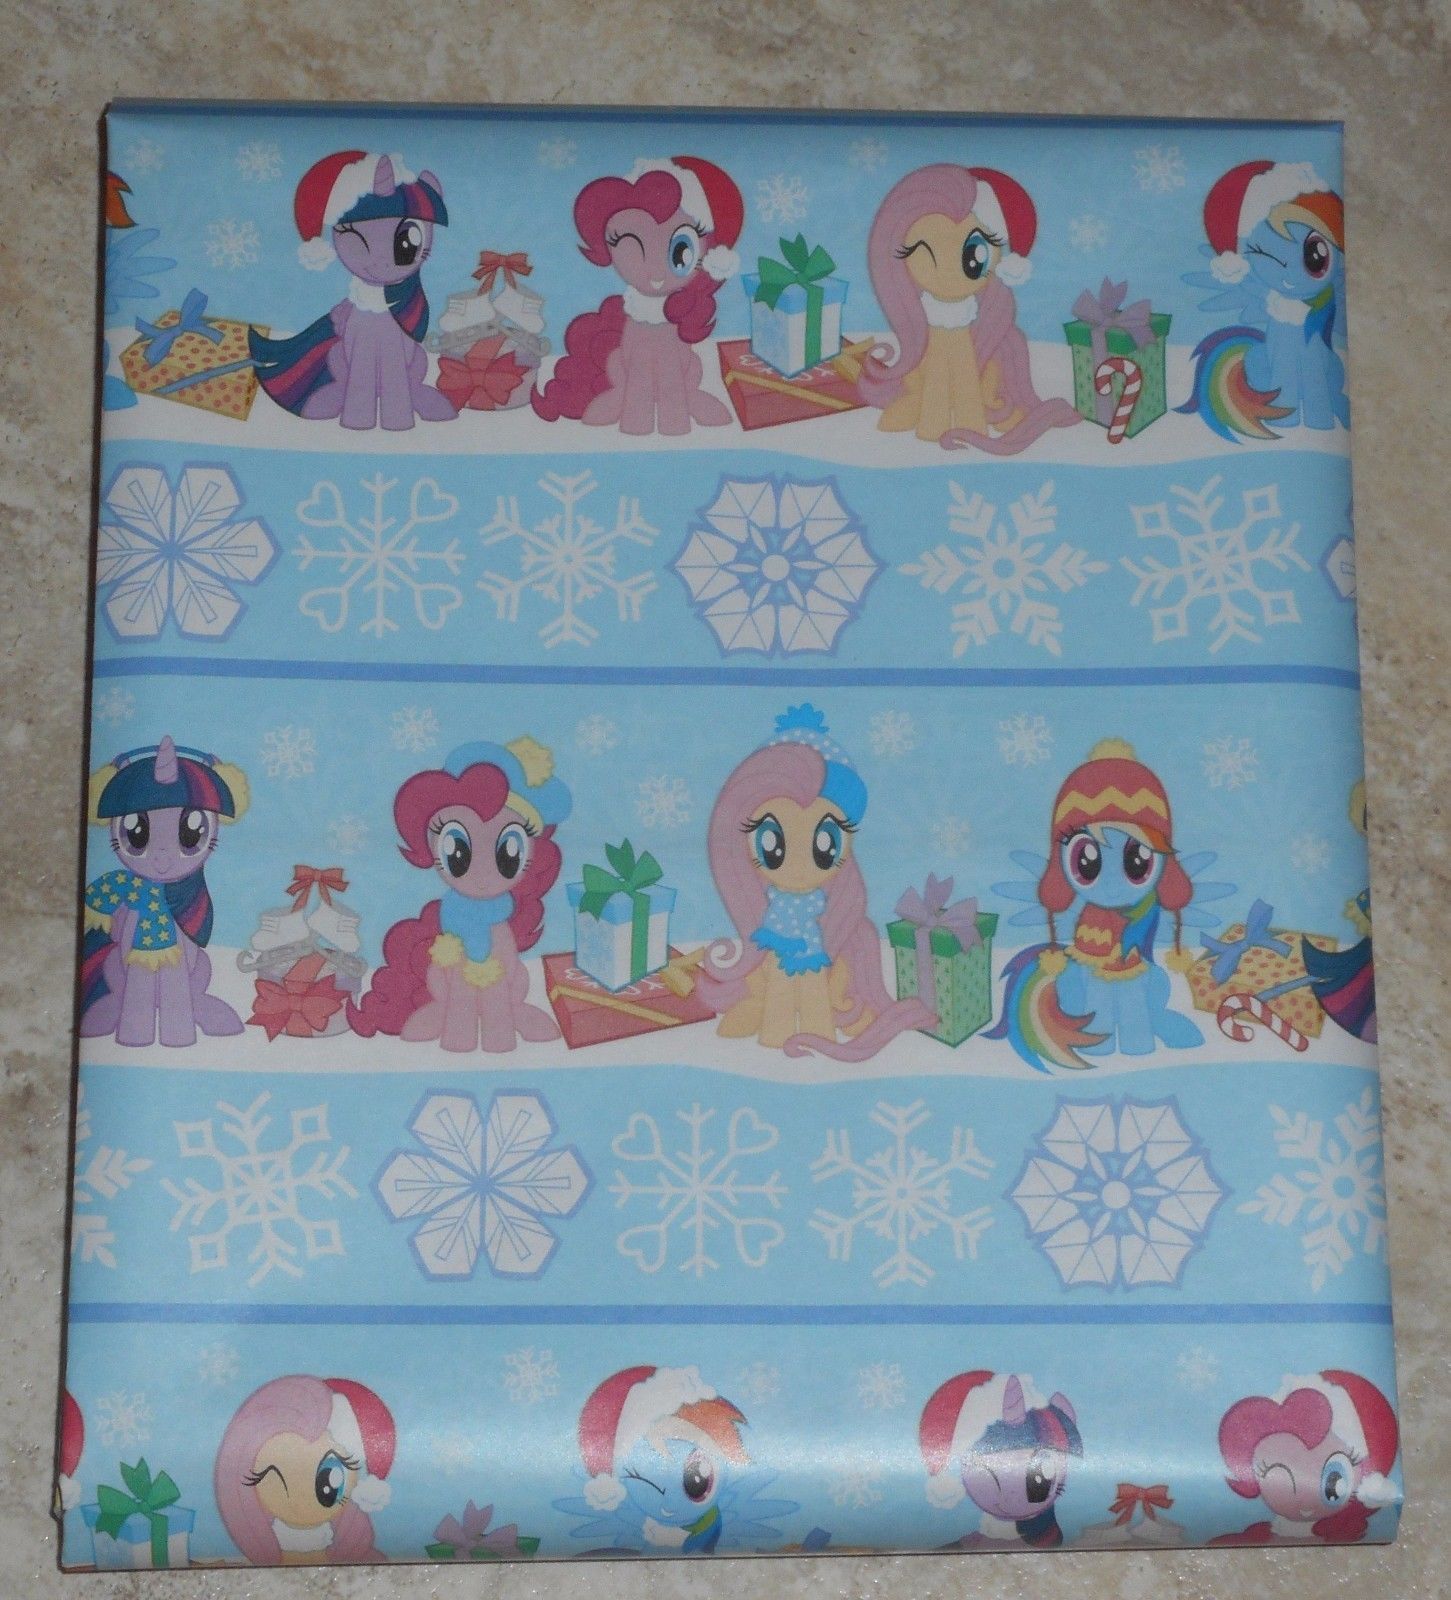 My Little Pony Christmas Wrapping Paper American Greetings 20 sq ft Roll